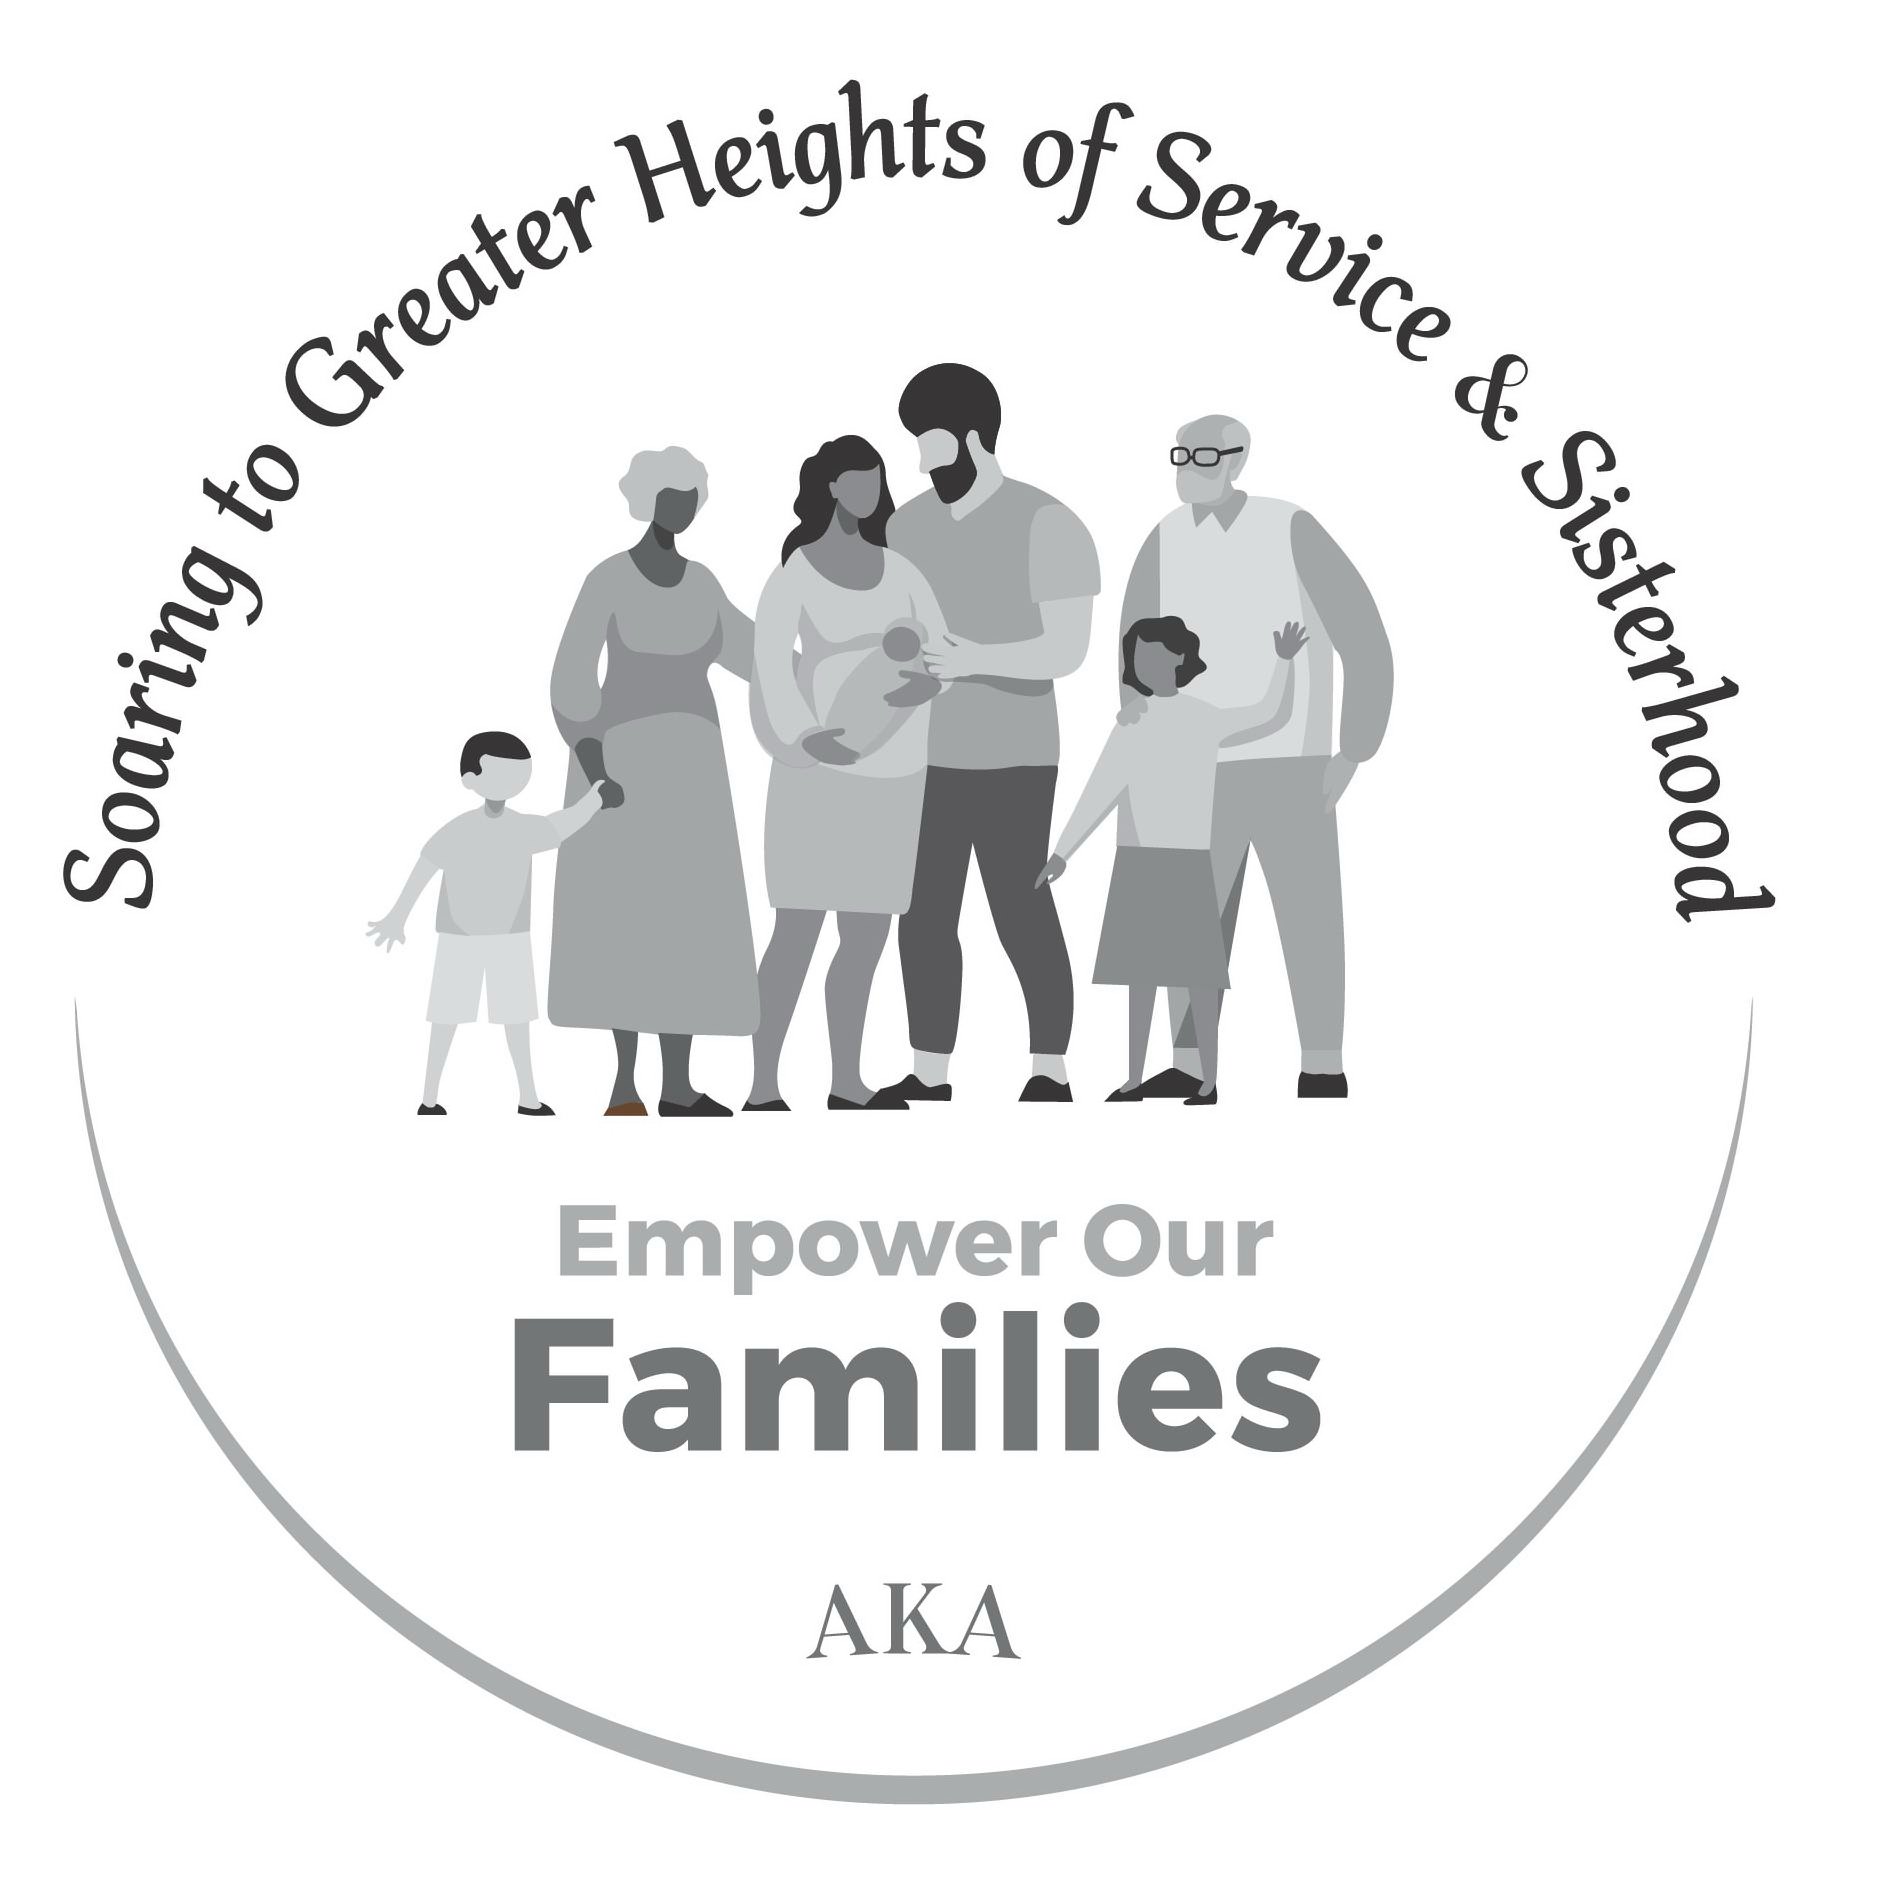 Trademark Logo SOARING TO GREATER HEIGHTS OF SERVICE &amp; SISTERHOOD EMPOWER OUR FAMILIES AKA